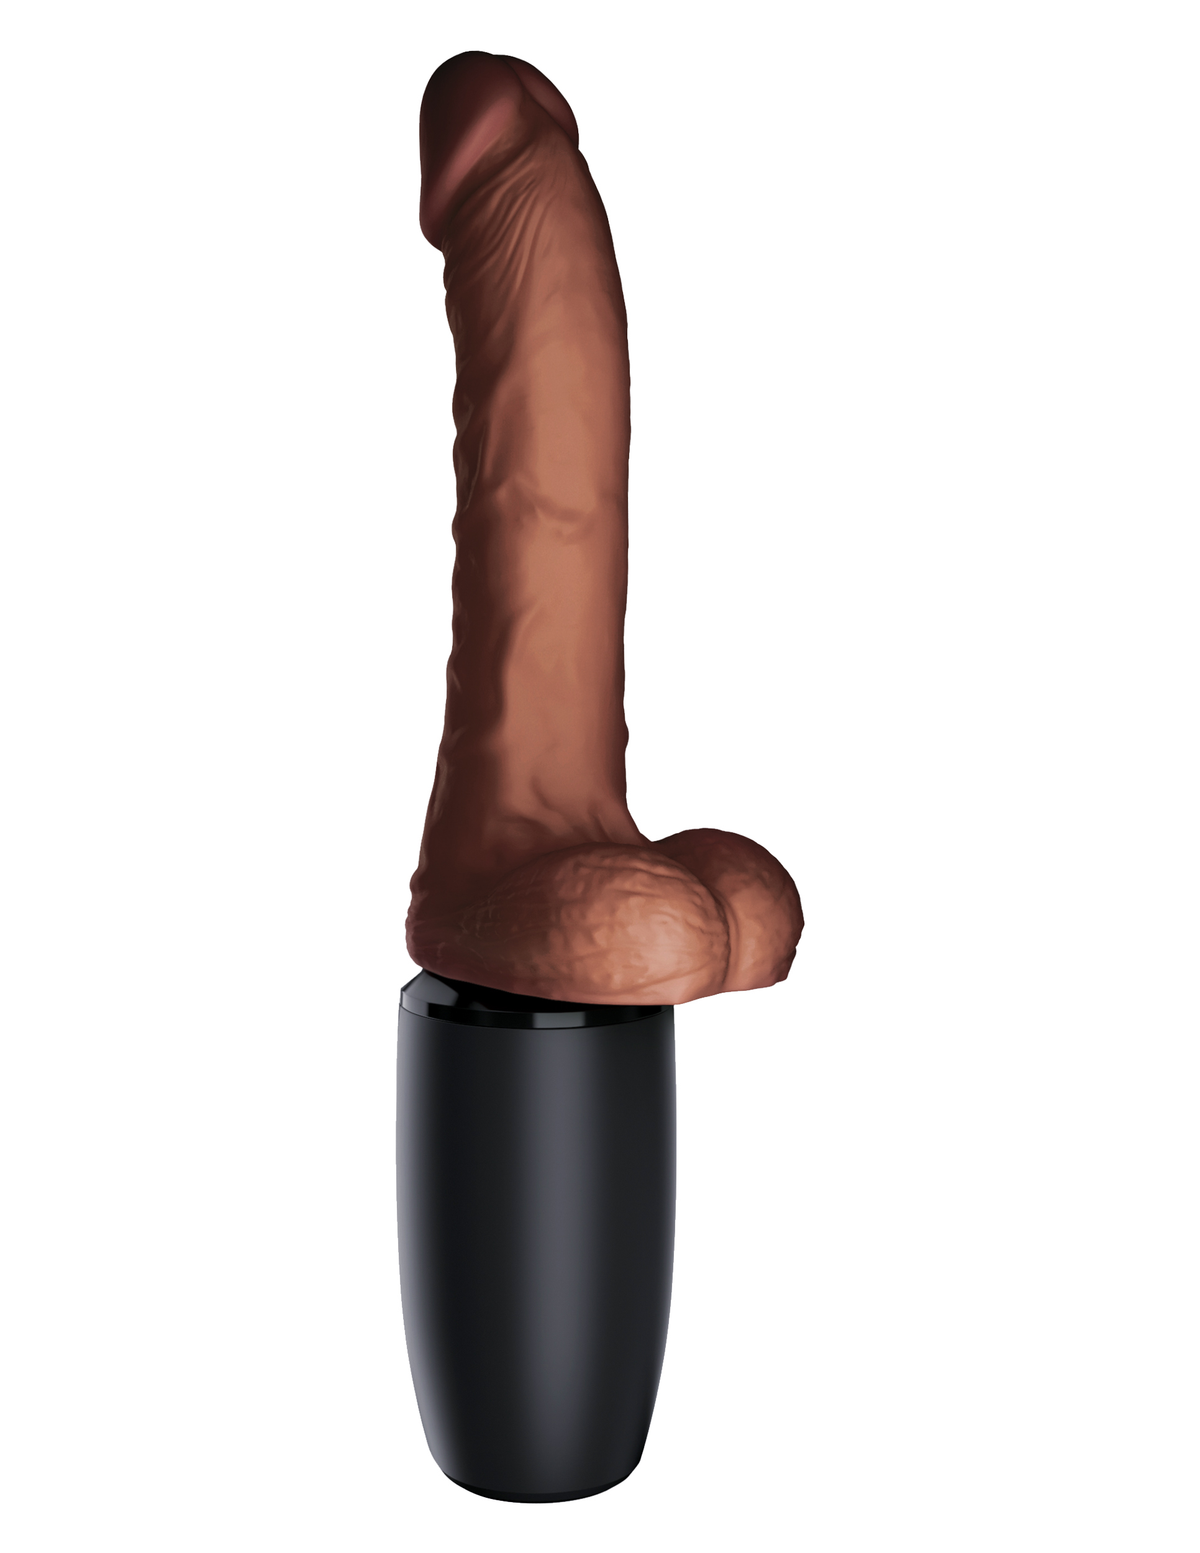 7 5 inch thrusting cock with balls brown